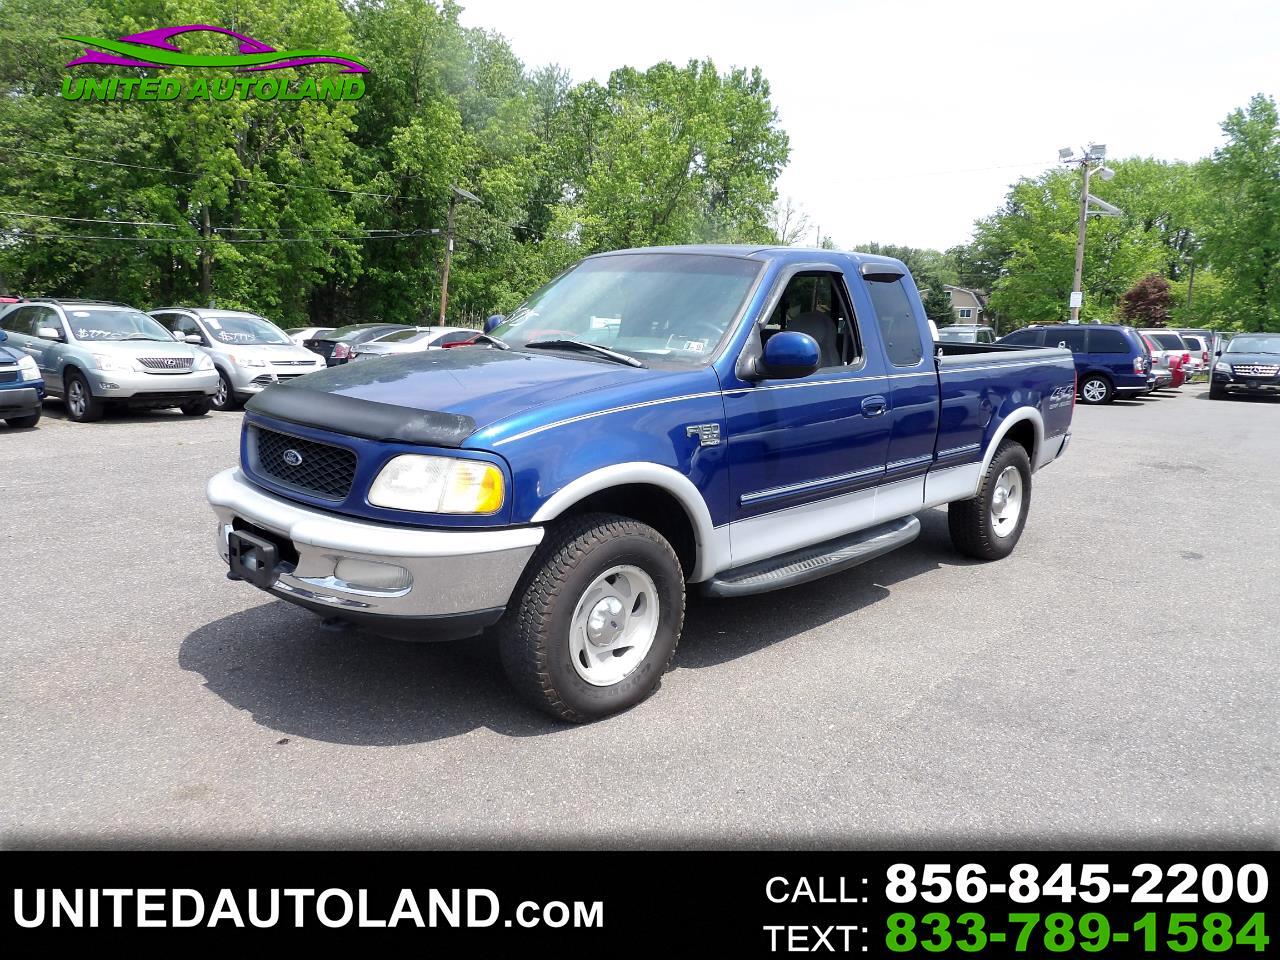 1998 Ford F-150 Supercab 139" 4WD